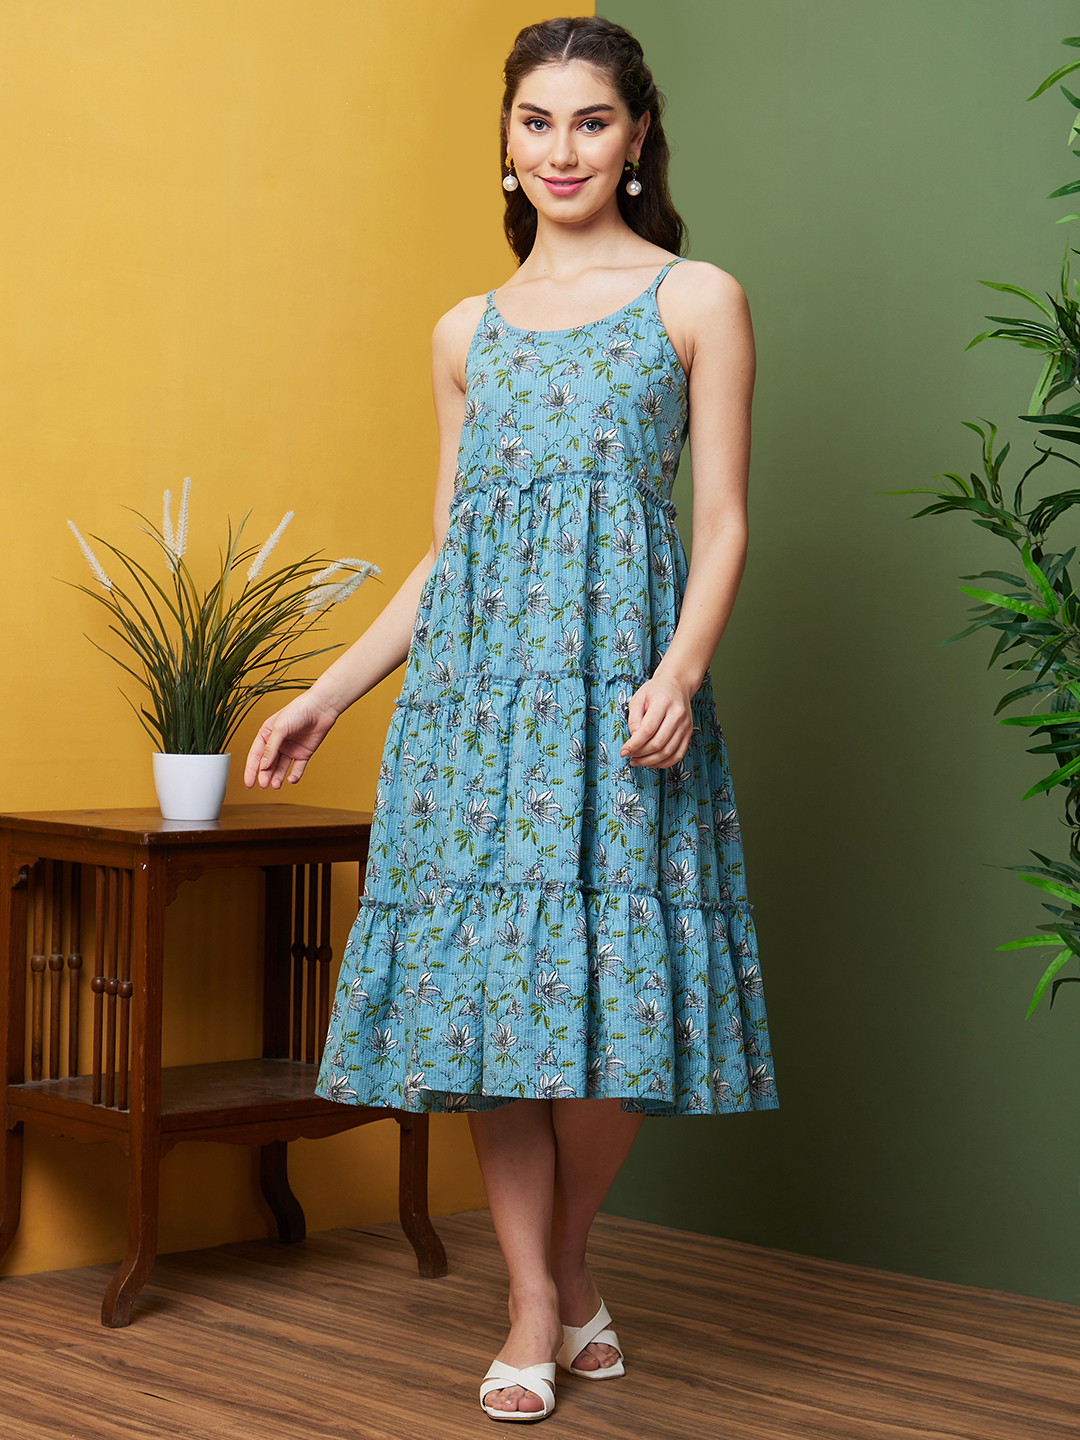 Globus Women Blue Floral Printed Casual Round Neck A-Line Ethnic Dresses